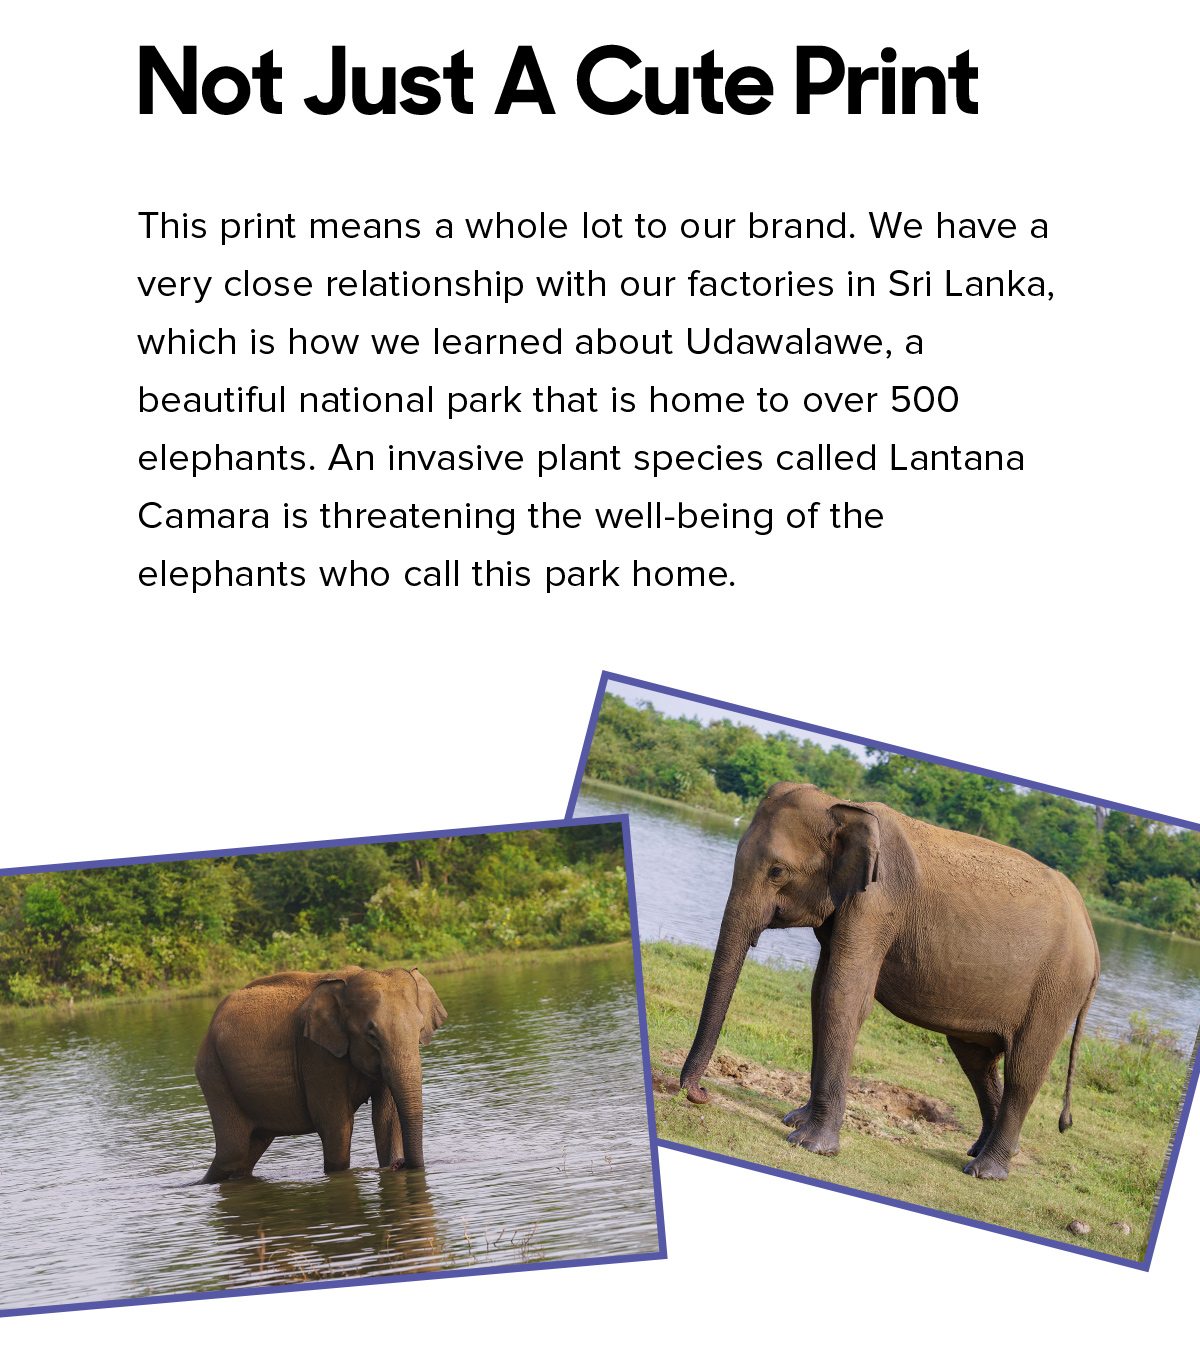 Not Just A Cute Print This print means a whole lot to our brand. We have a very close relationship with our factories in Sri Lanka, which is how we learned about Udawalawe, a beautiful national park that is home to over 500 elephants. An invasive plant species called Lantana Camara is threatening the well-being of the elephants who call this park home.